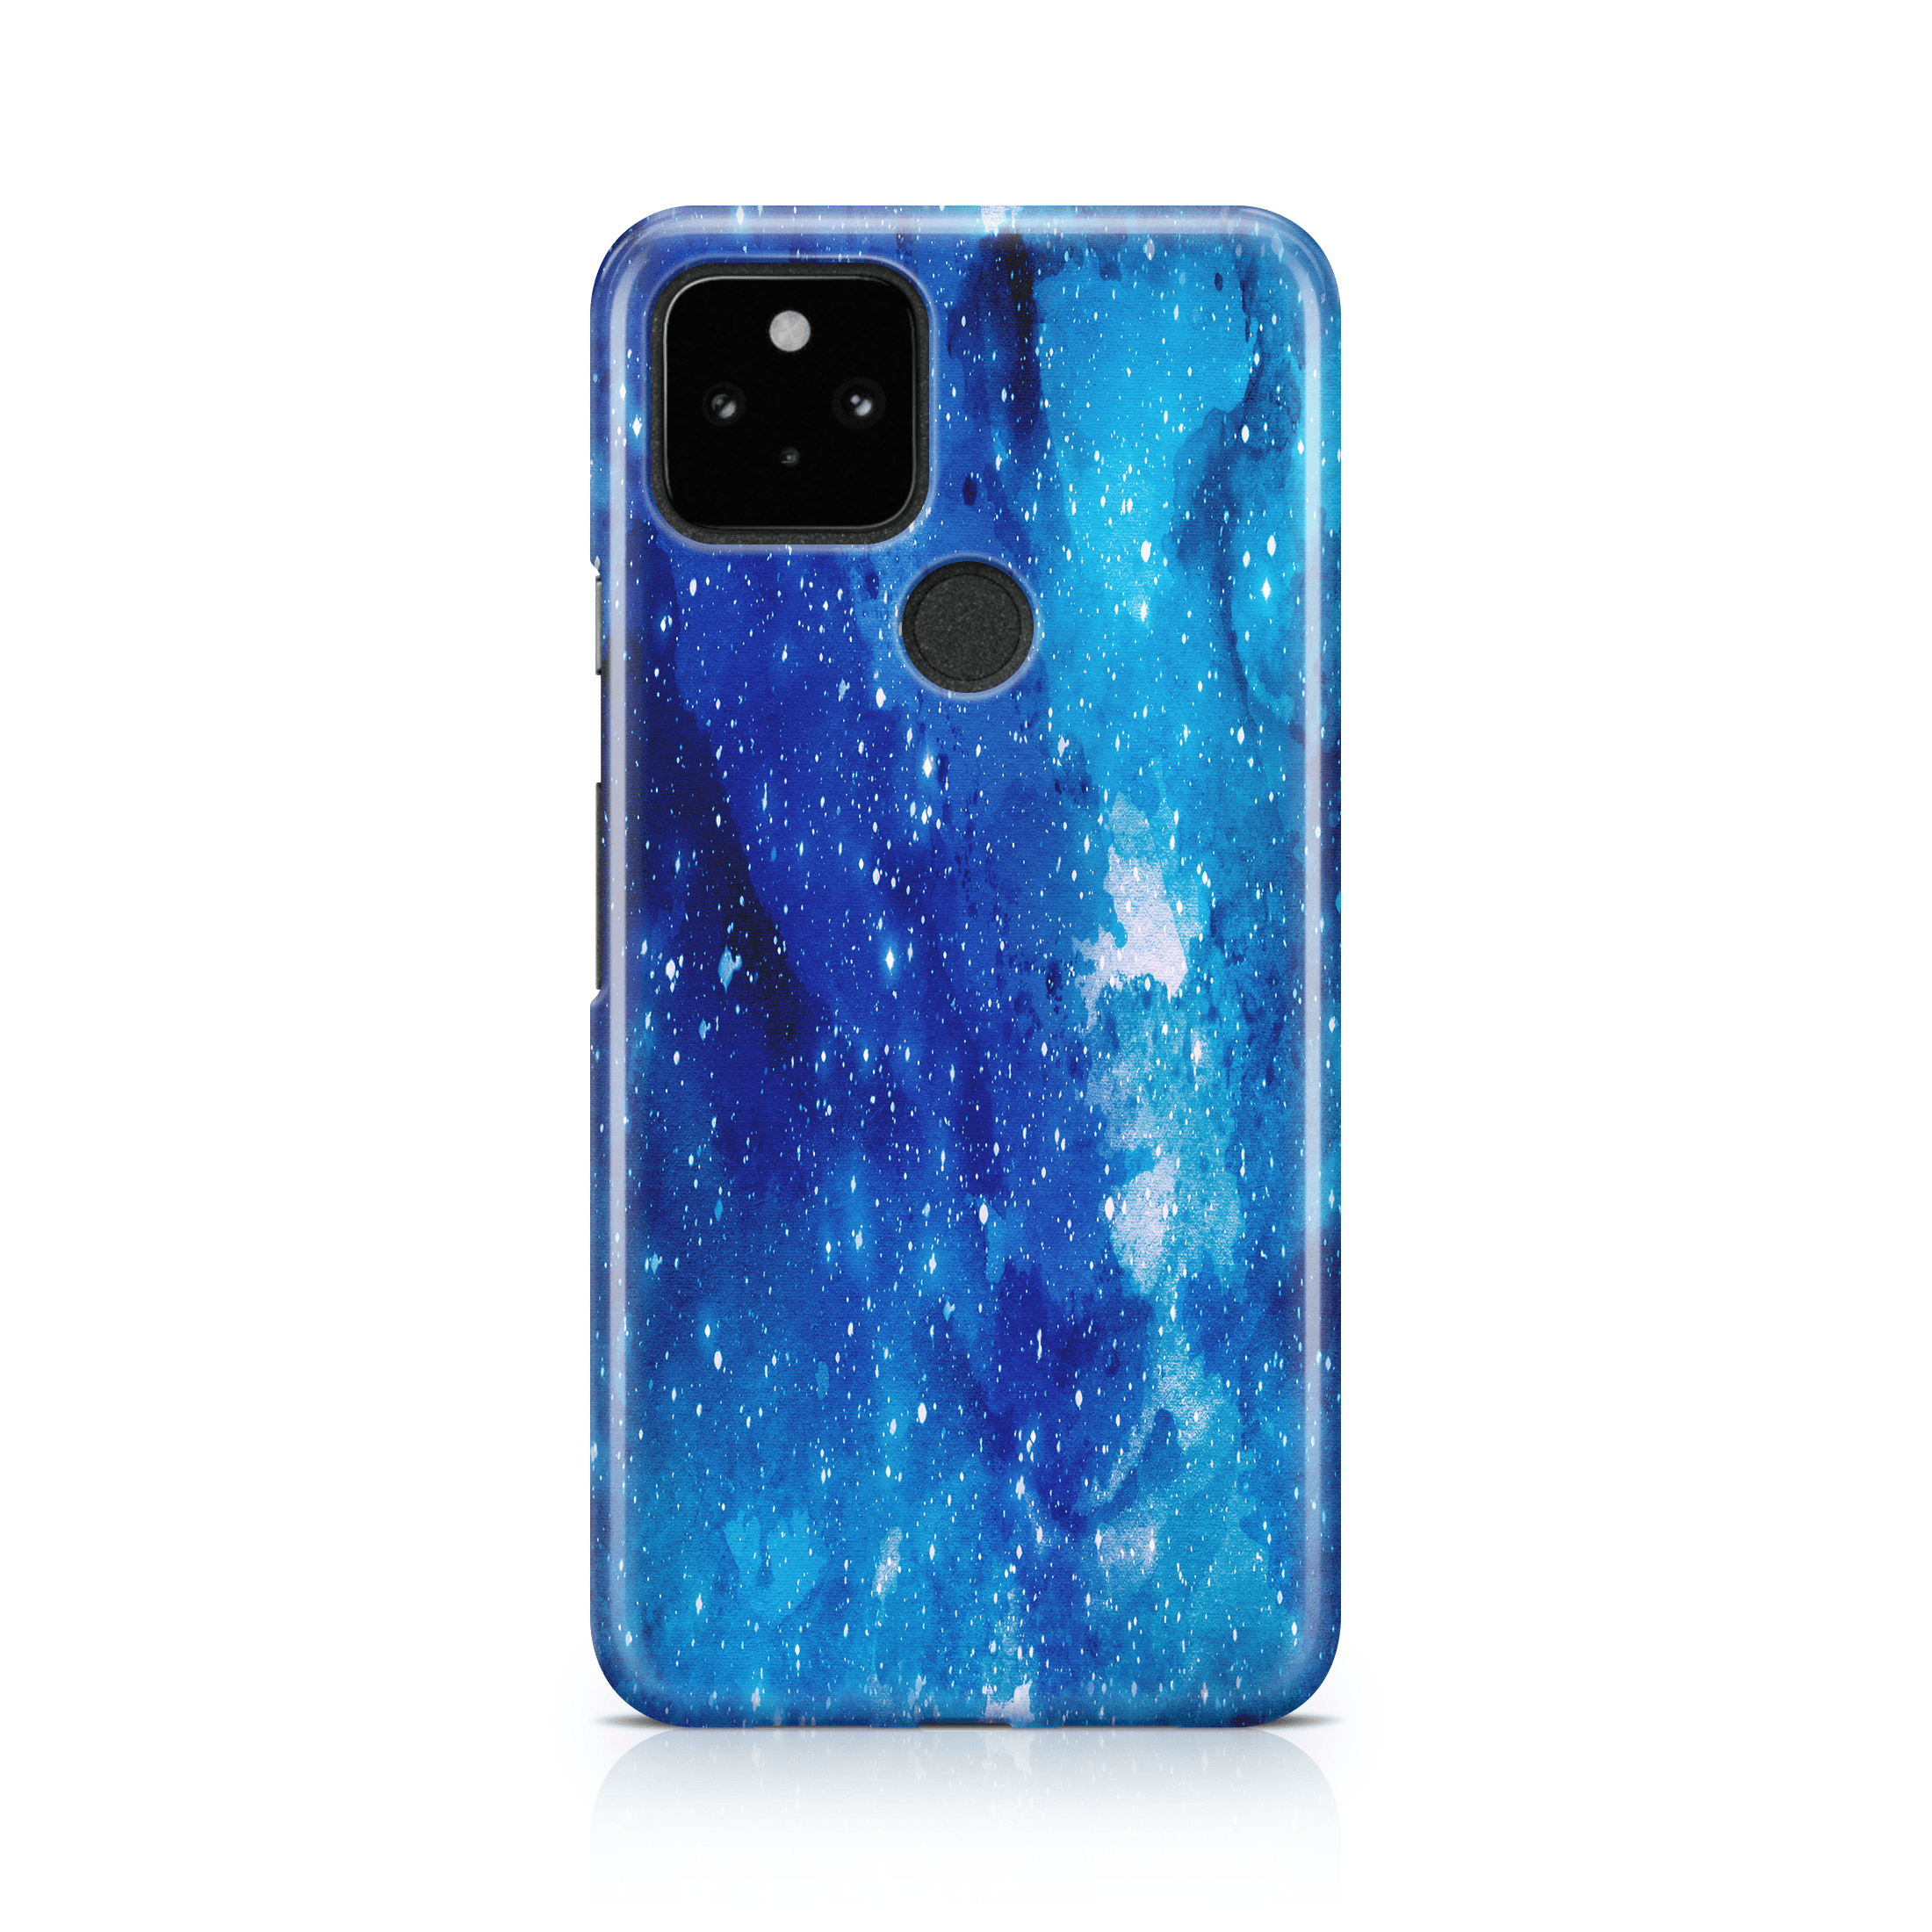 Blue Space - Google phone case designs by CaseSwagger